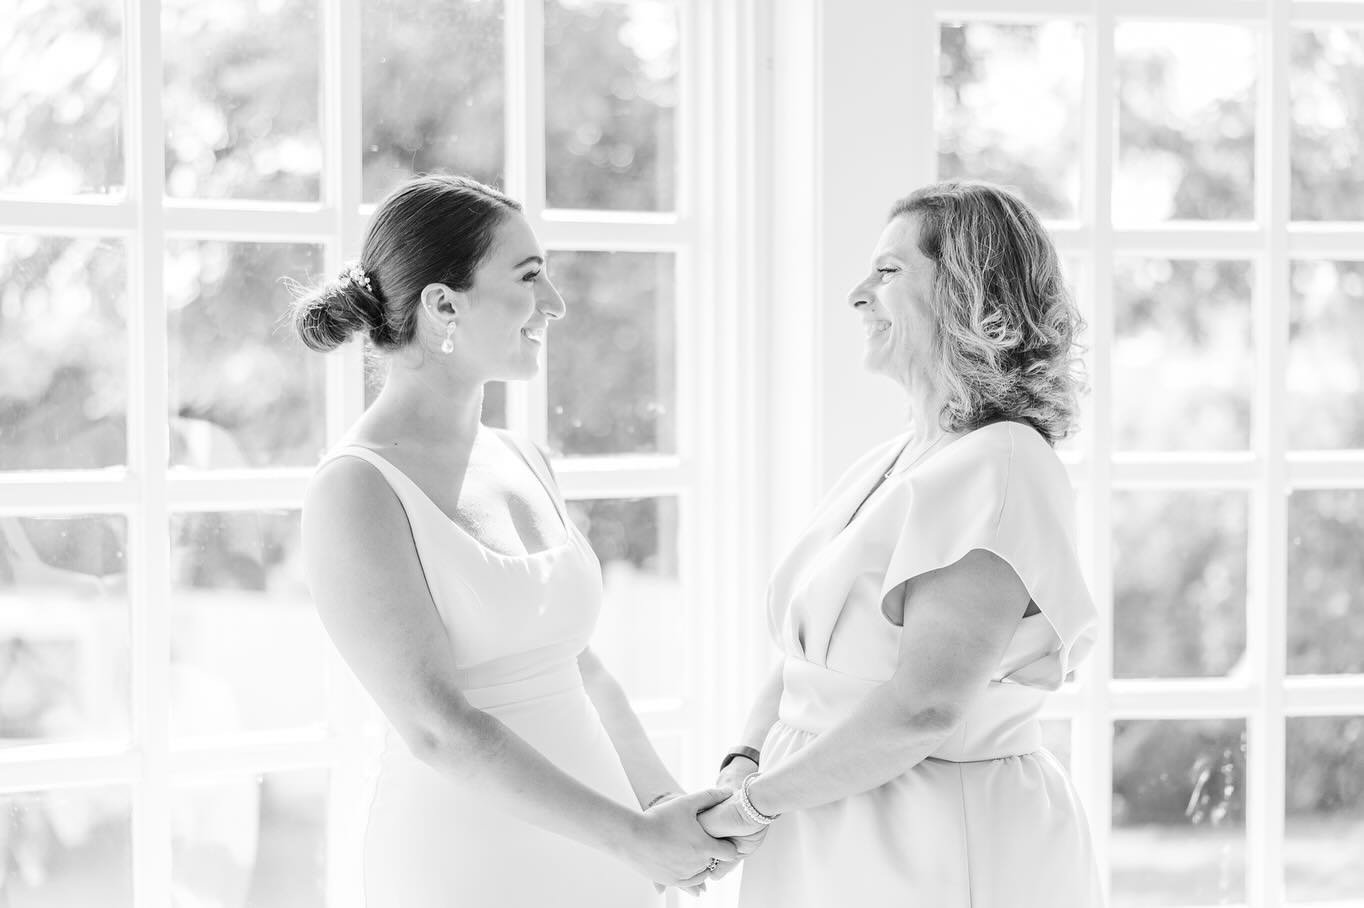 Soak in those special moments with those around you on your wedding day, especially the morning of.  Quite often, the people that surround you early in the day are some of the most important people in your life (parents, siblings, best friends, and g